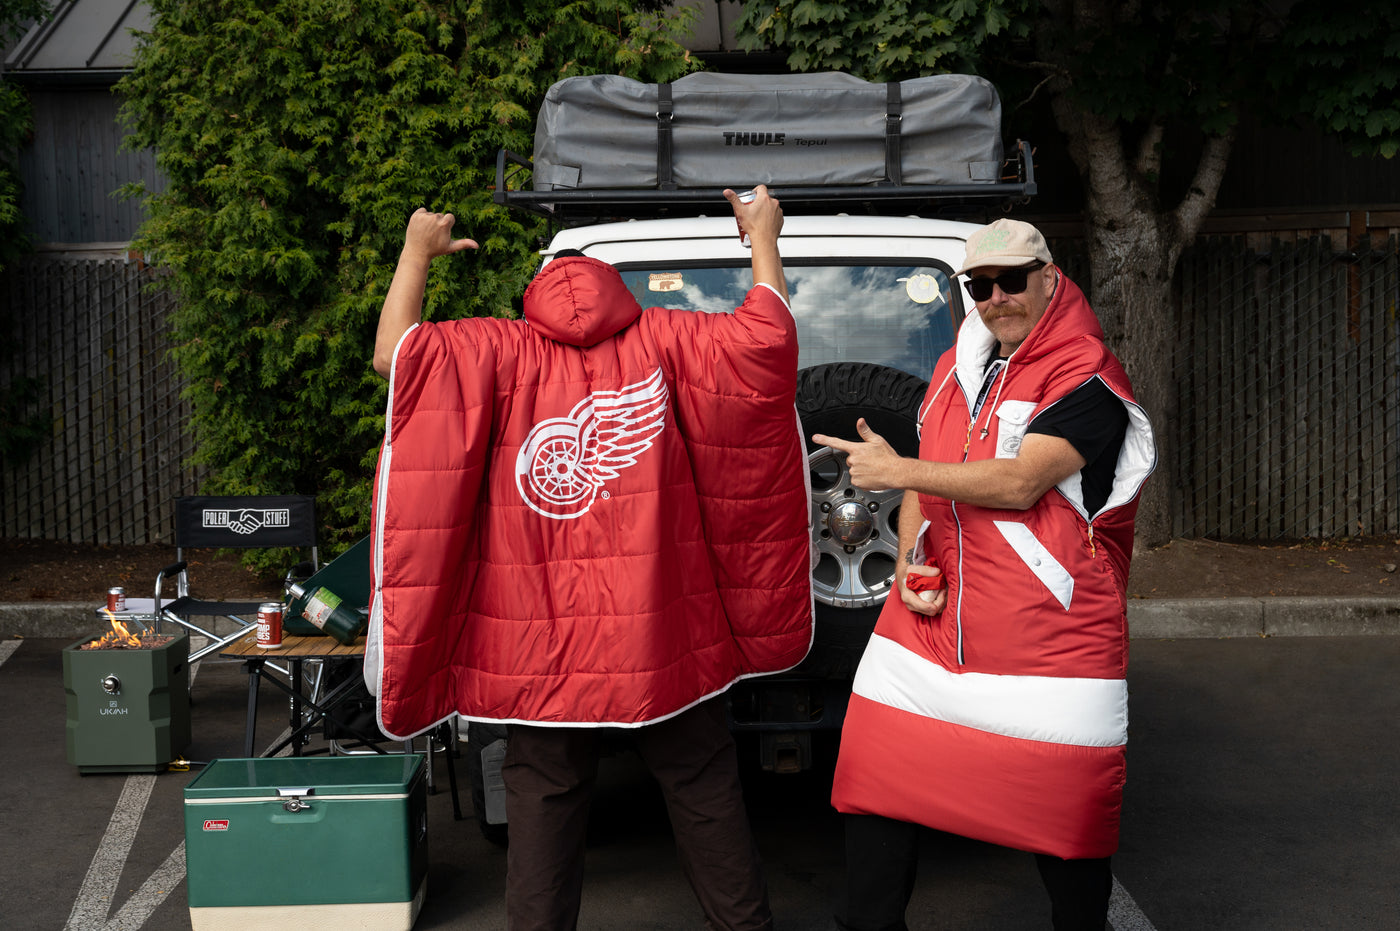 Detroit Red Wings Poncho